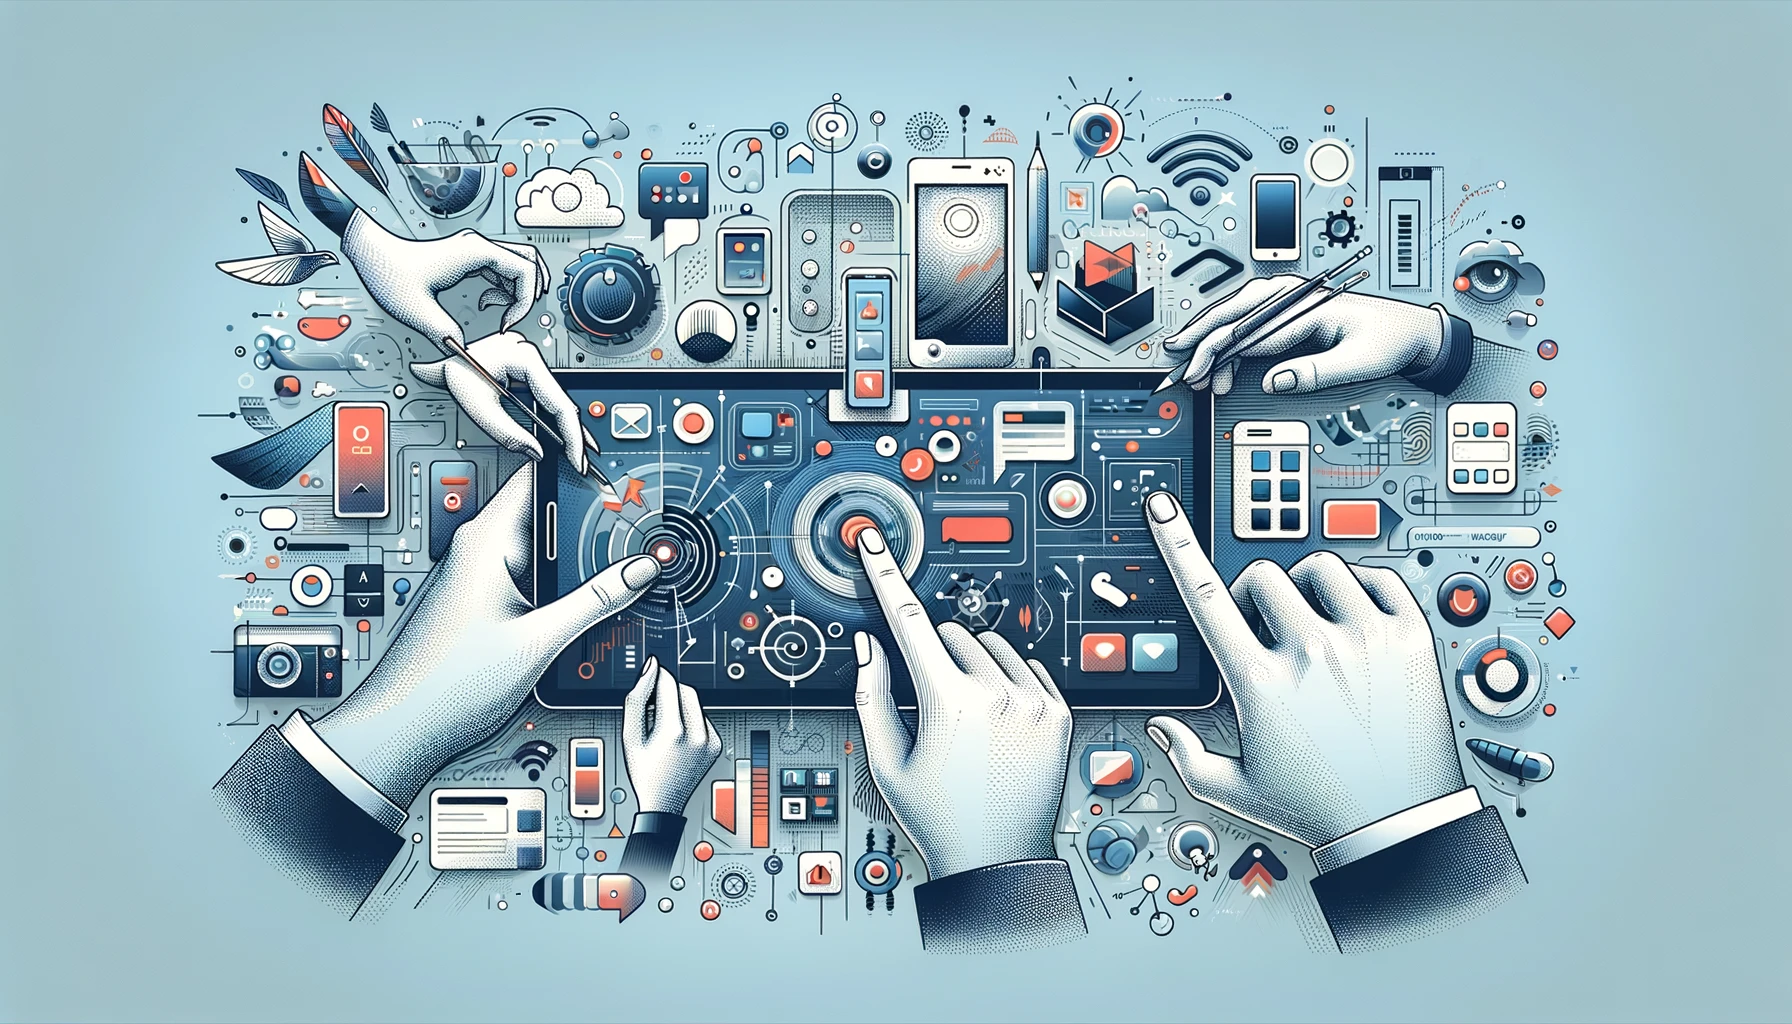 Artistic-Depiction-of-UI-Design-Featuring-Hands-Interacting-With-Digital-Elements-Screens-Buttons-Icons-User-Engagement-Visuals